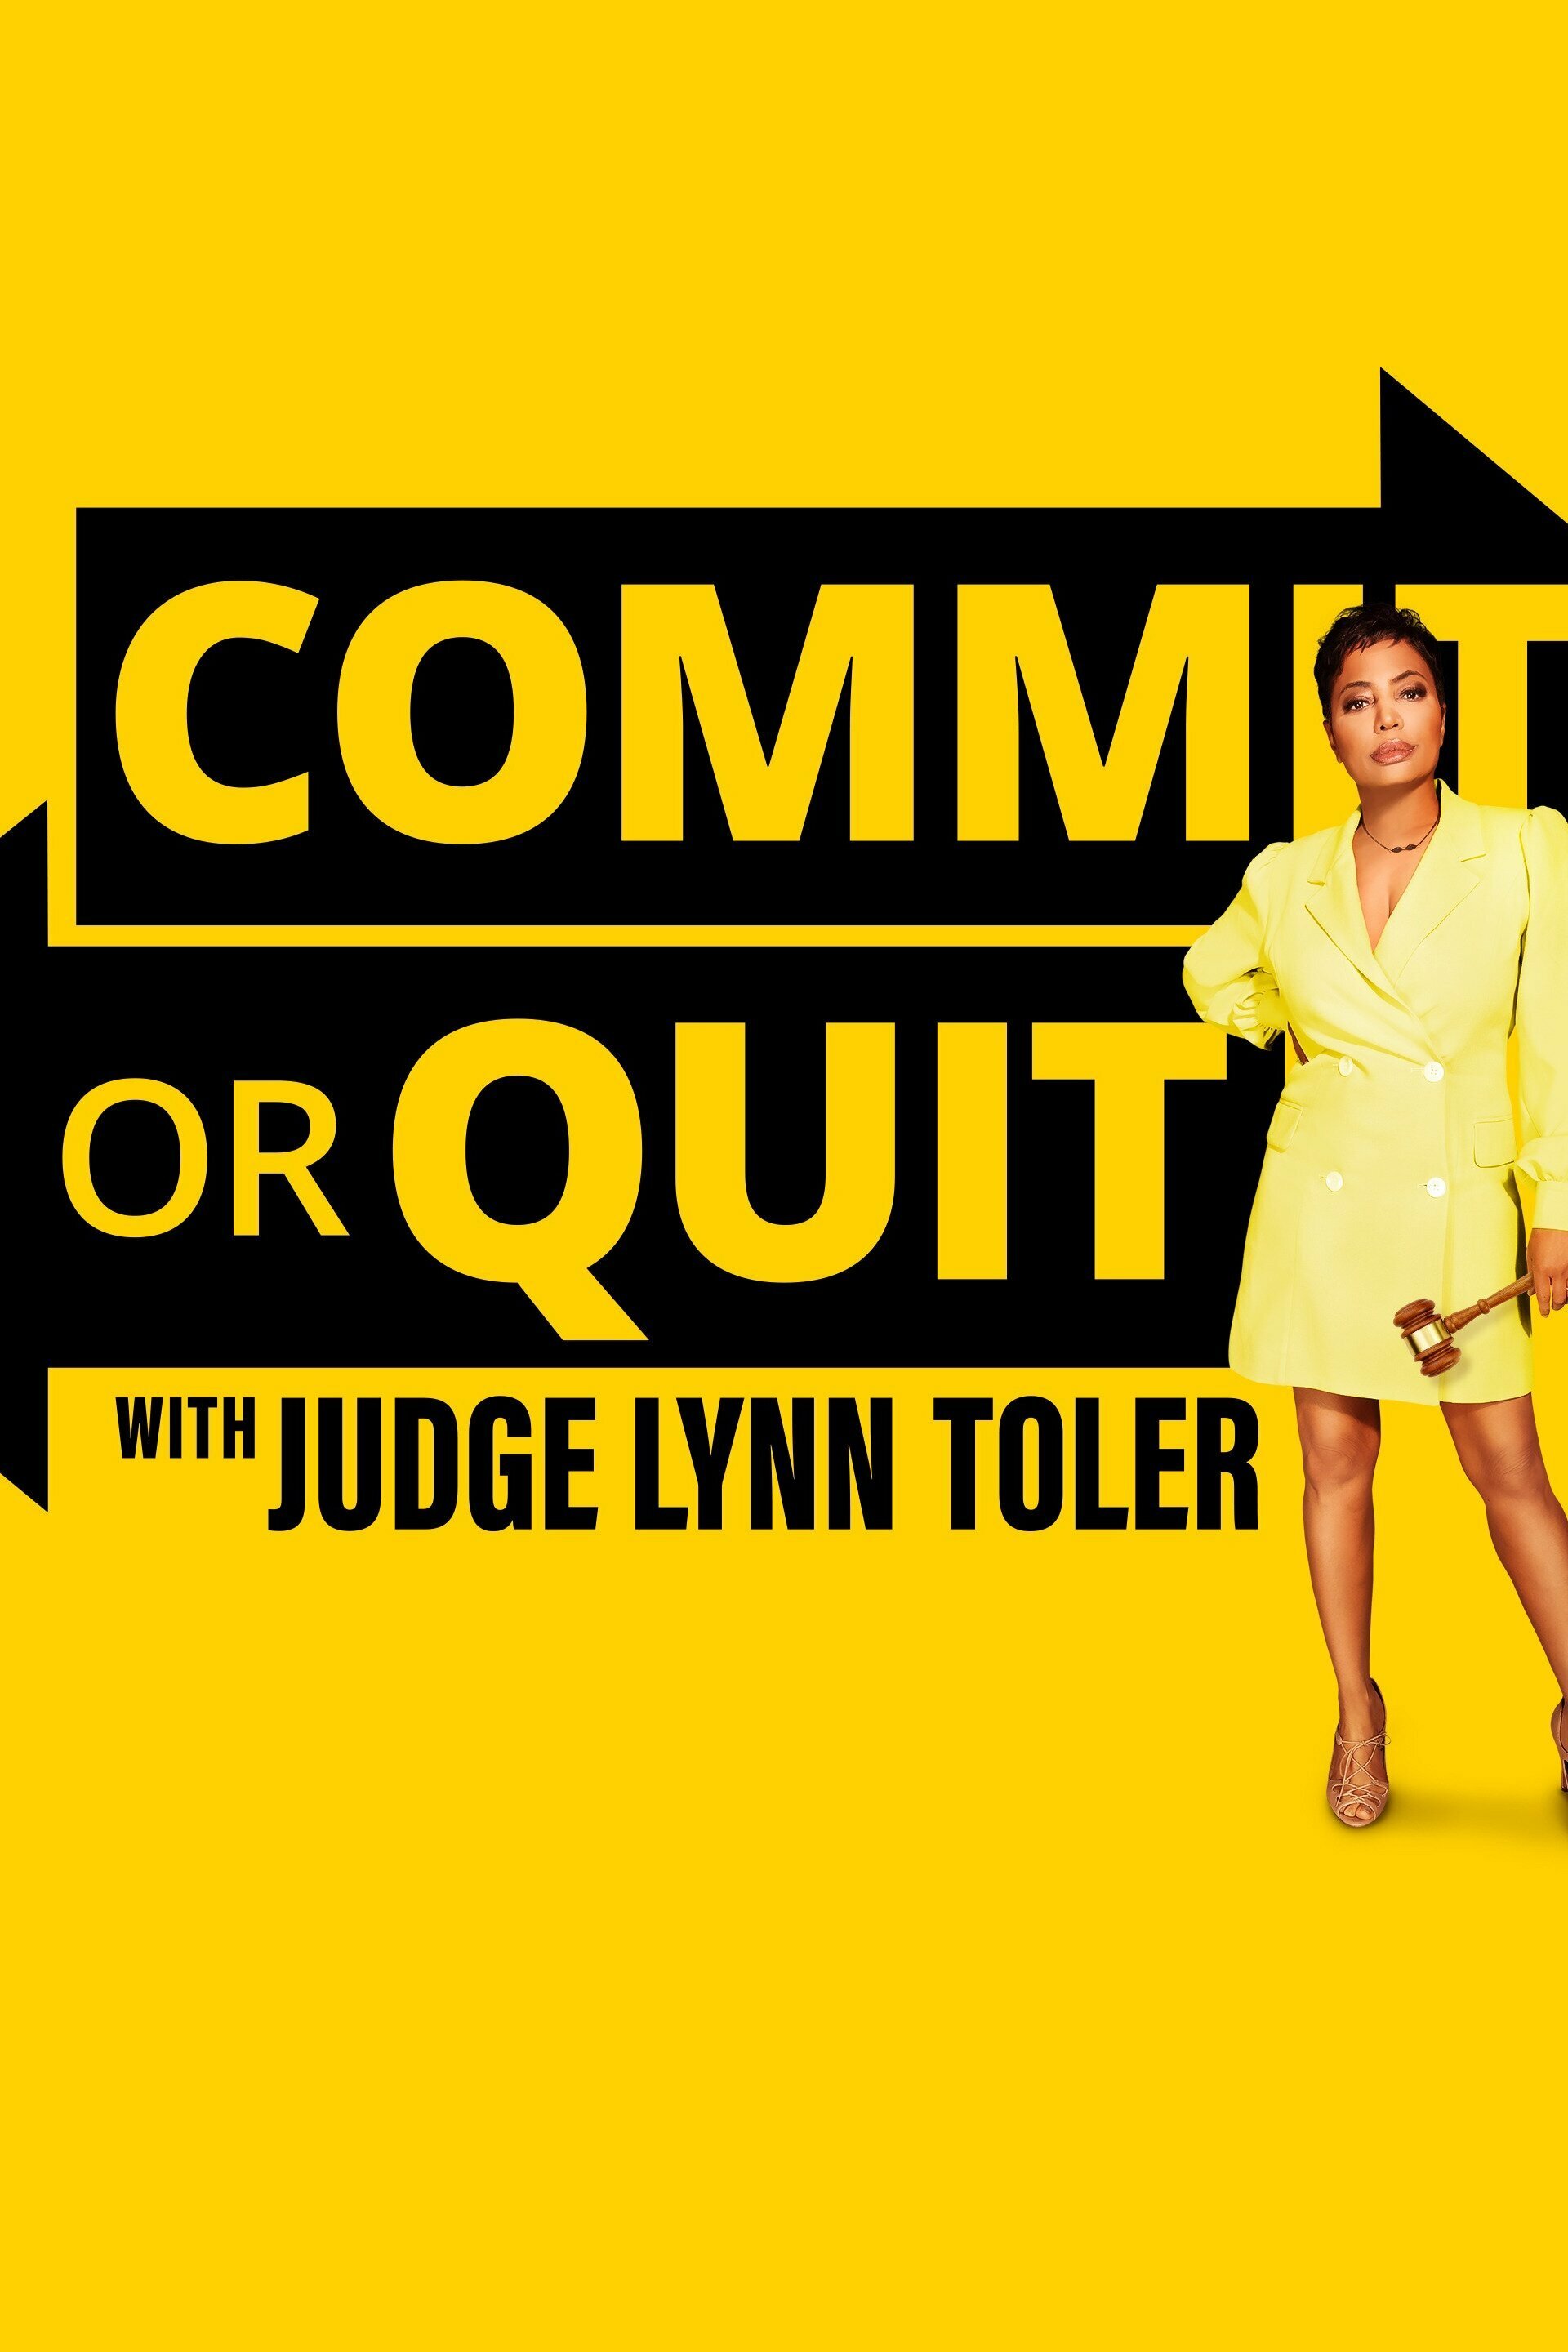 Commit or Quit with Judge Lynn Toler ne zaman